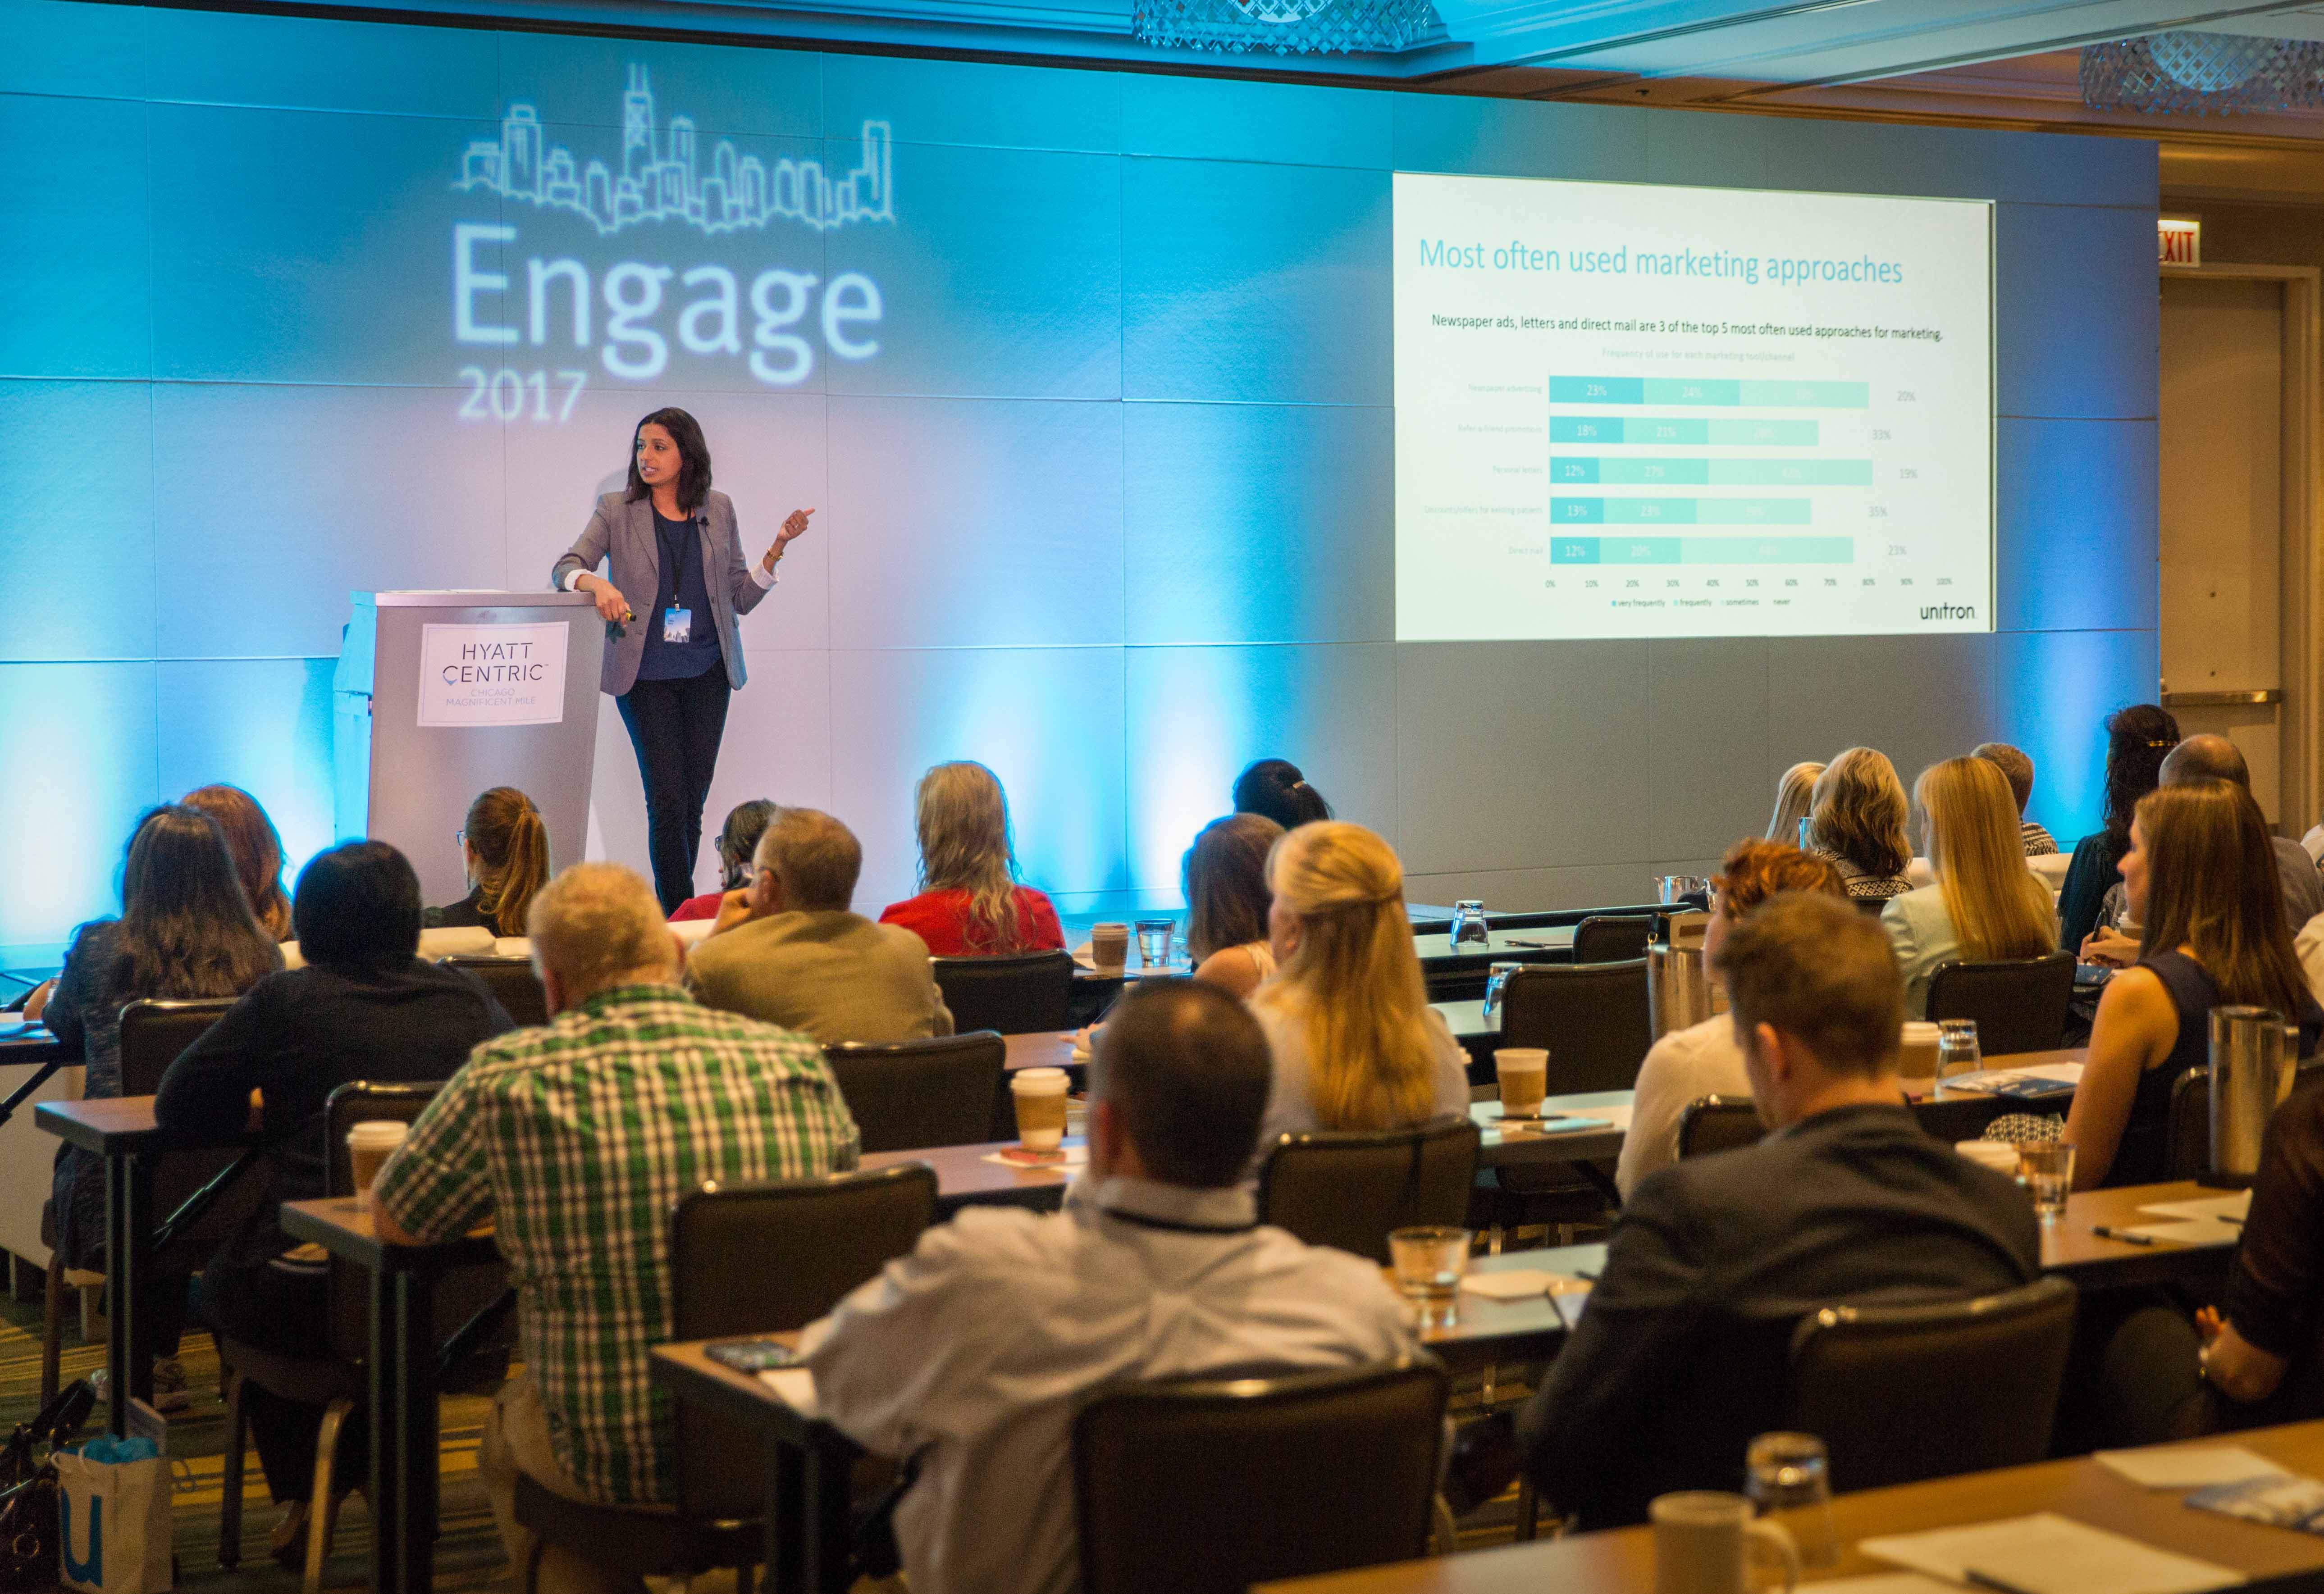 ENGAGE 2017 conference